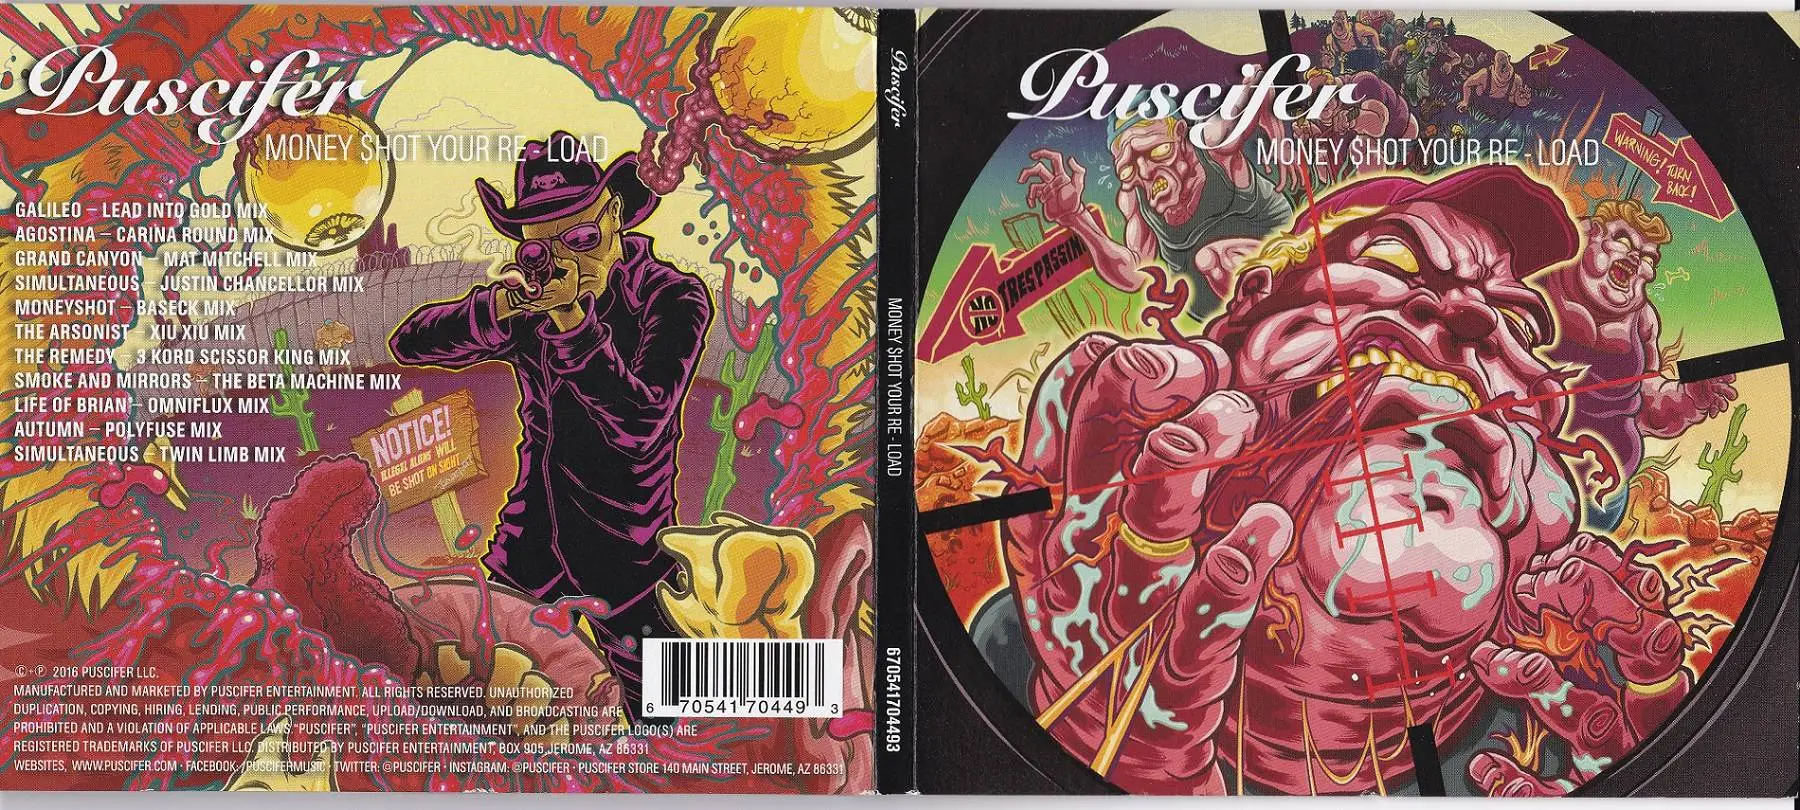 Puscifer Money Shot Your Re Load 2016 Avaxhome